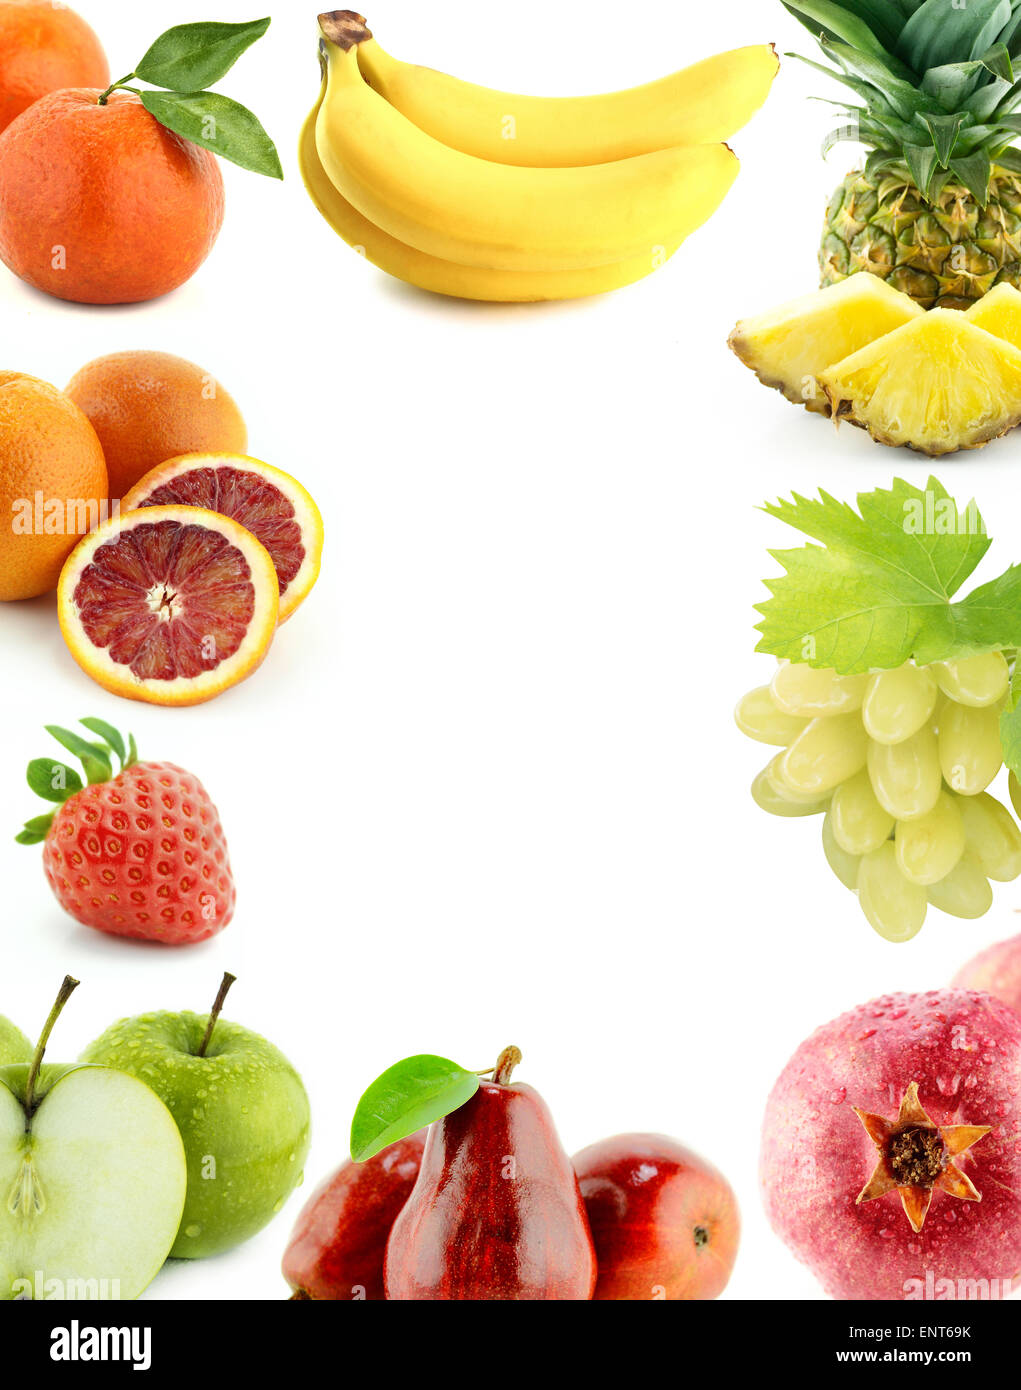 Healthy Organic Vegetables and Fruits on a white Background. Art Border Design with copy space to add text. Stock Photo